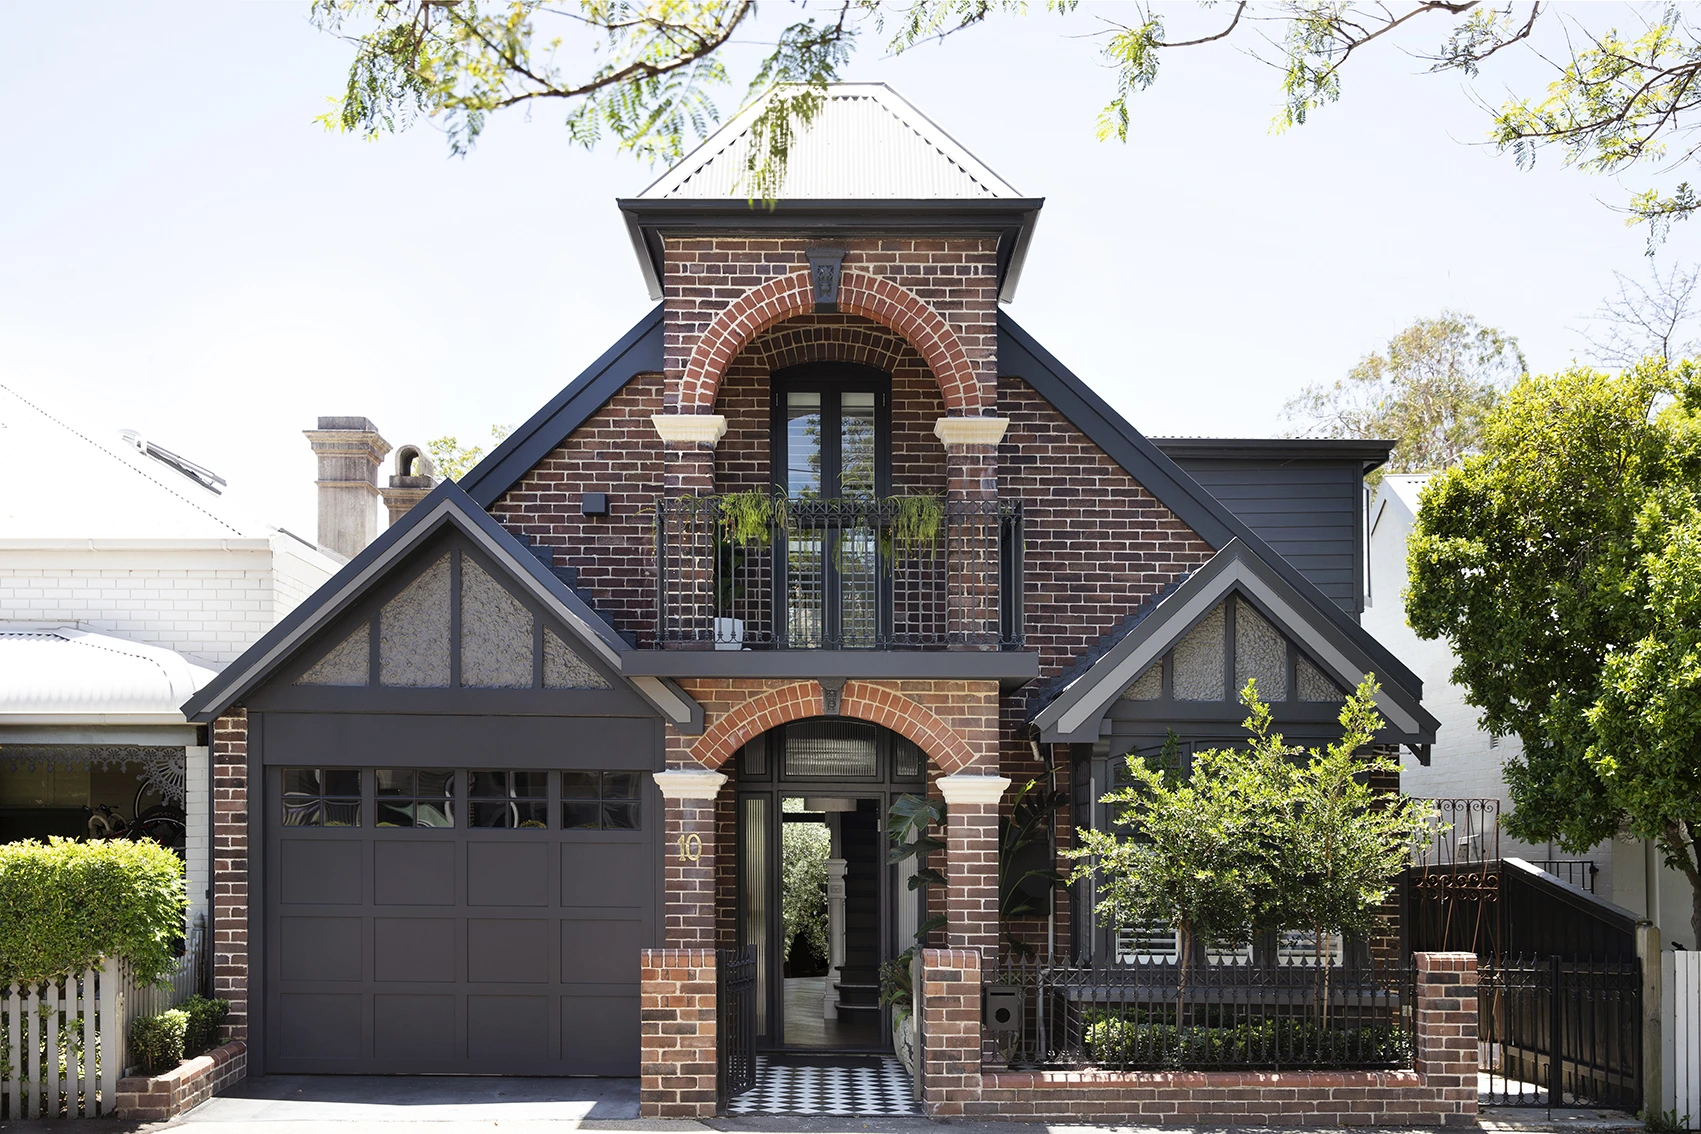 Red brick double-storey house with black trim.